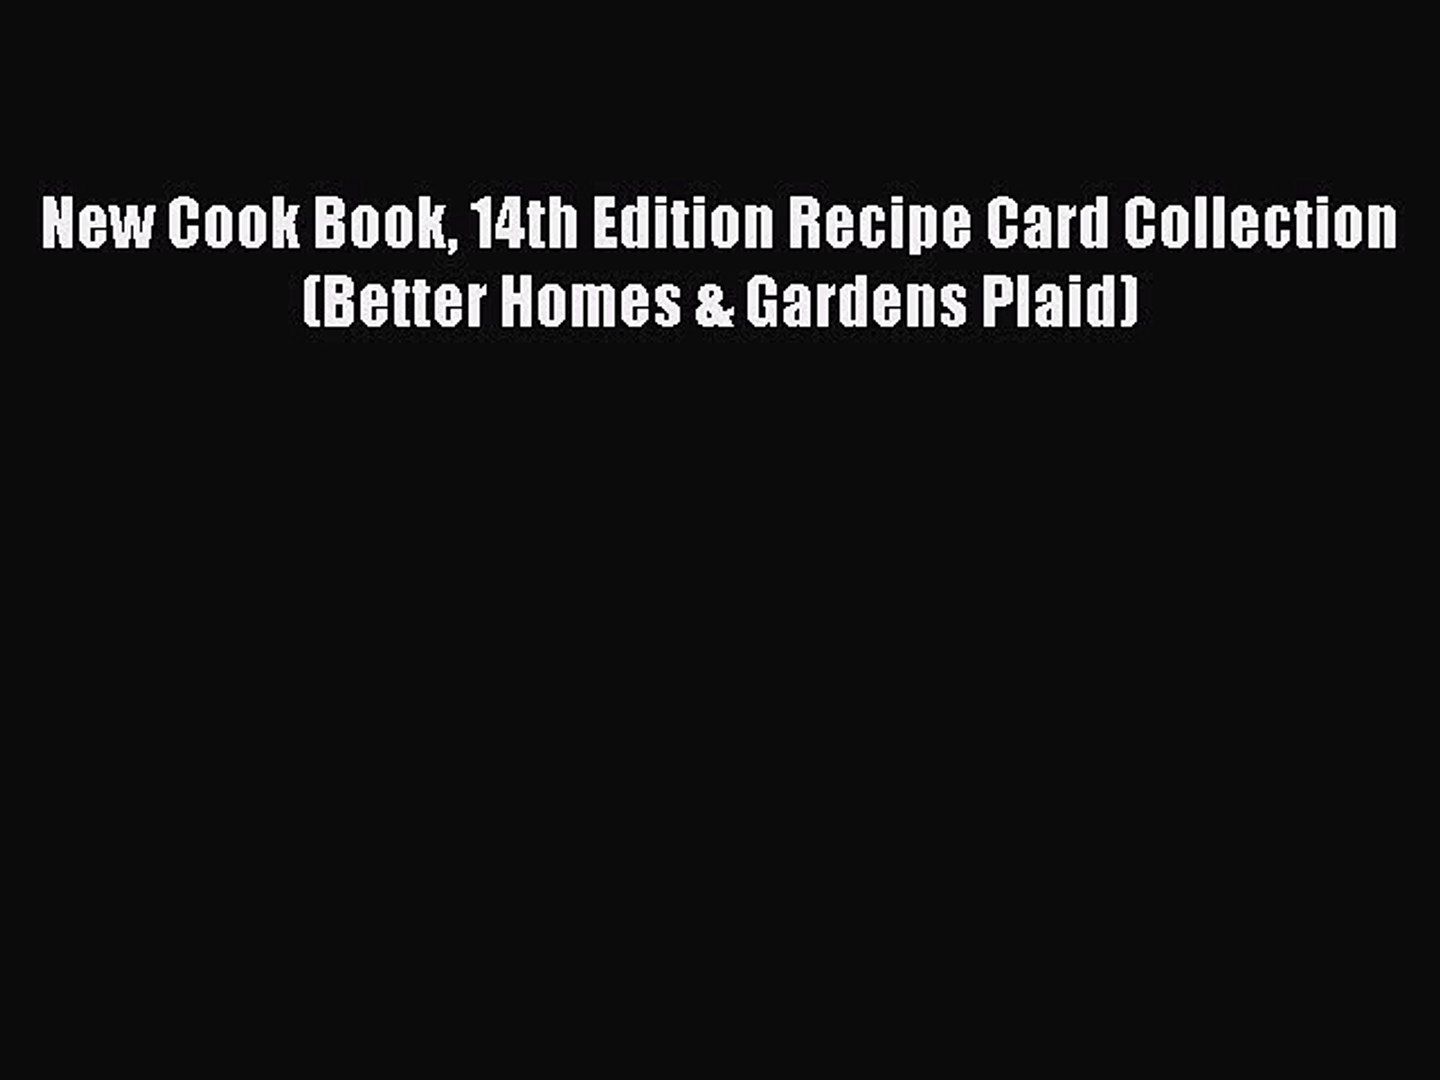 Pdf New Cook Book 14th Edition Recipe Card Collection Better